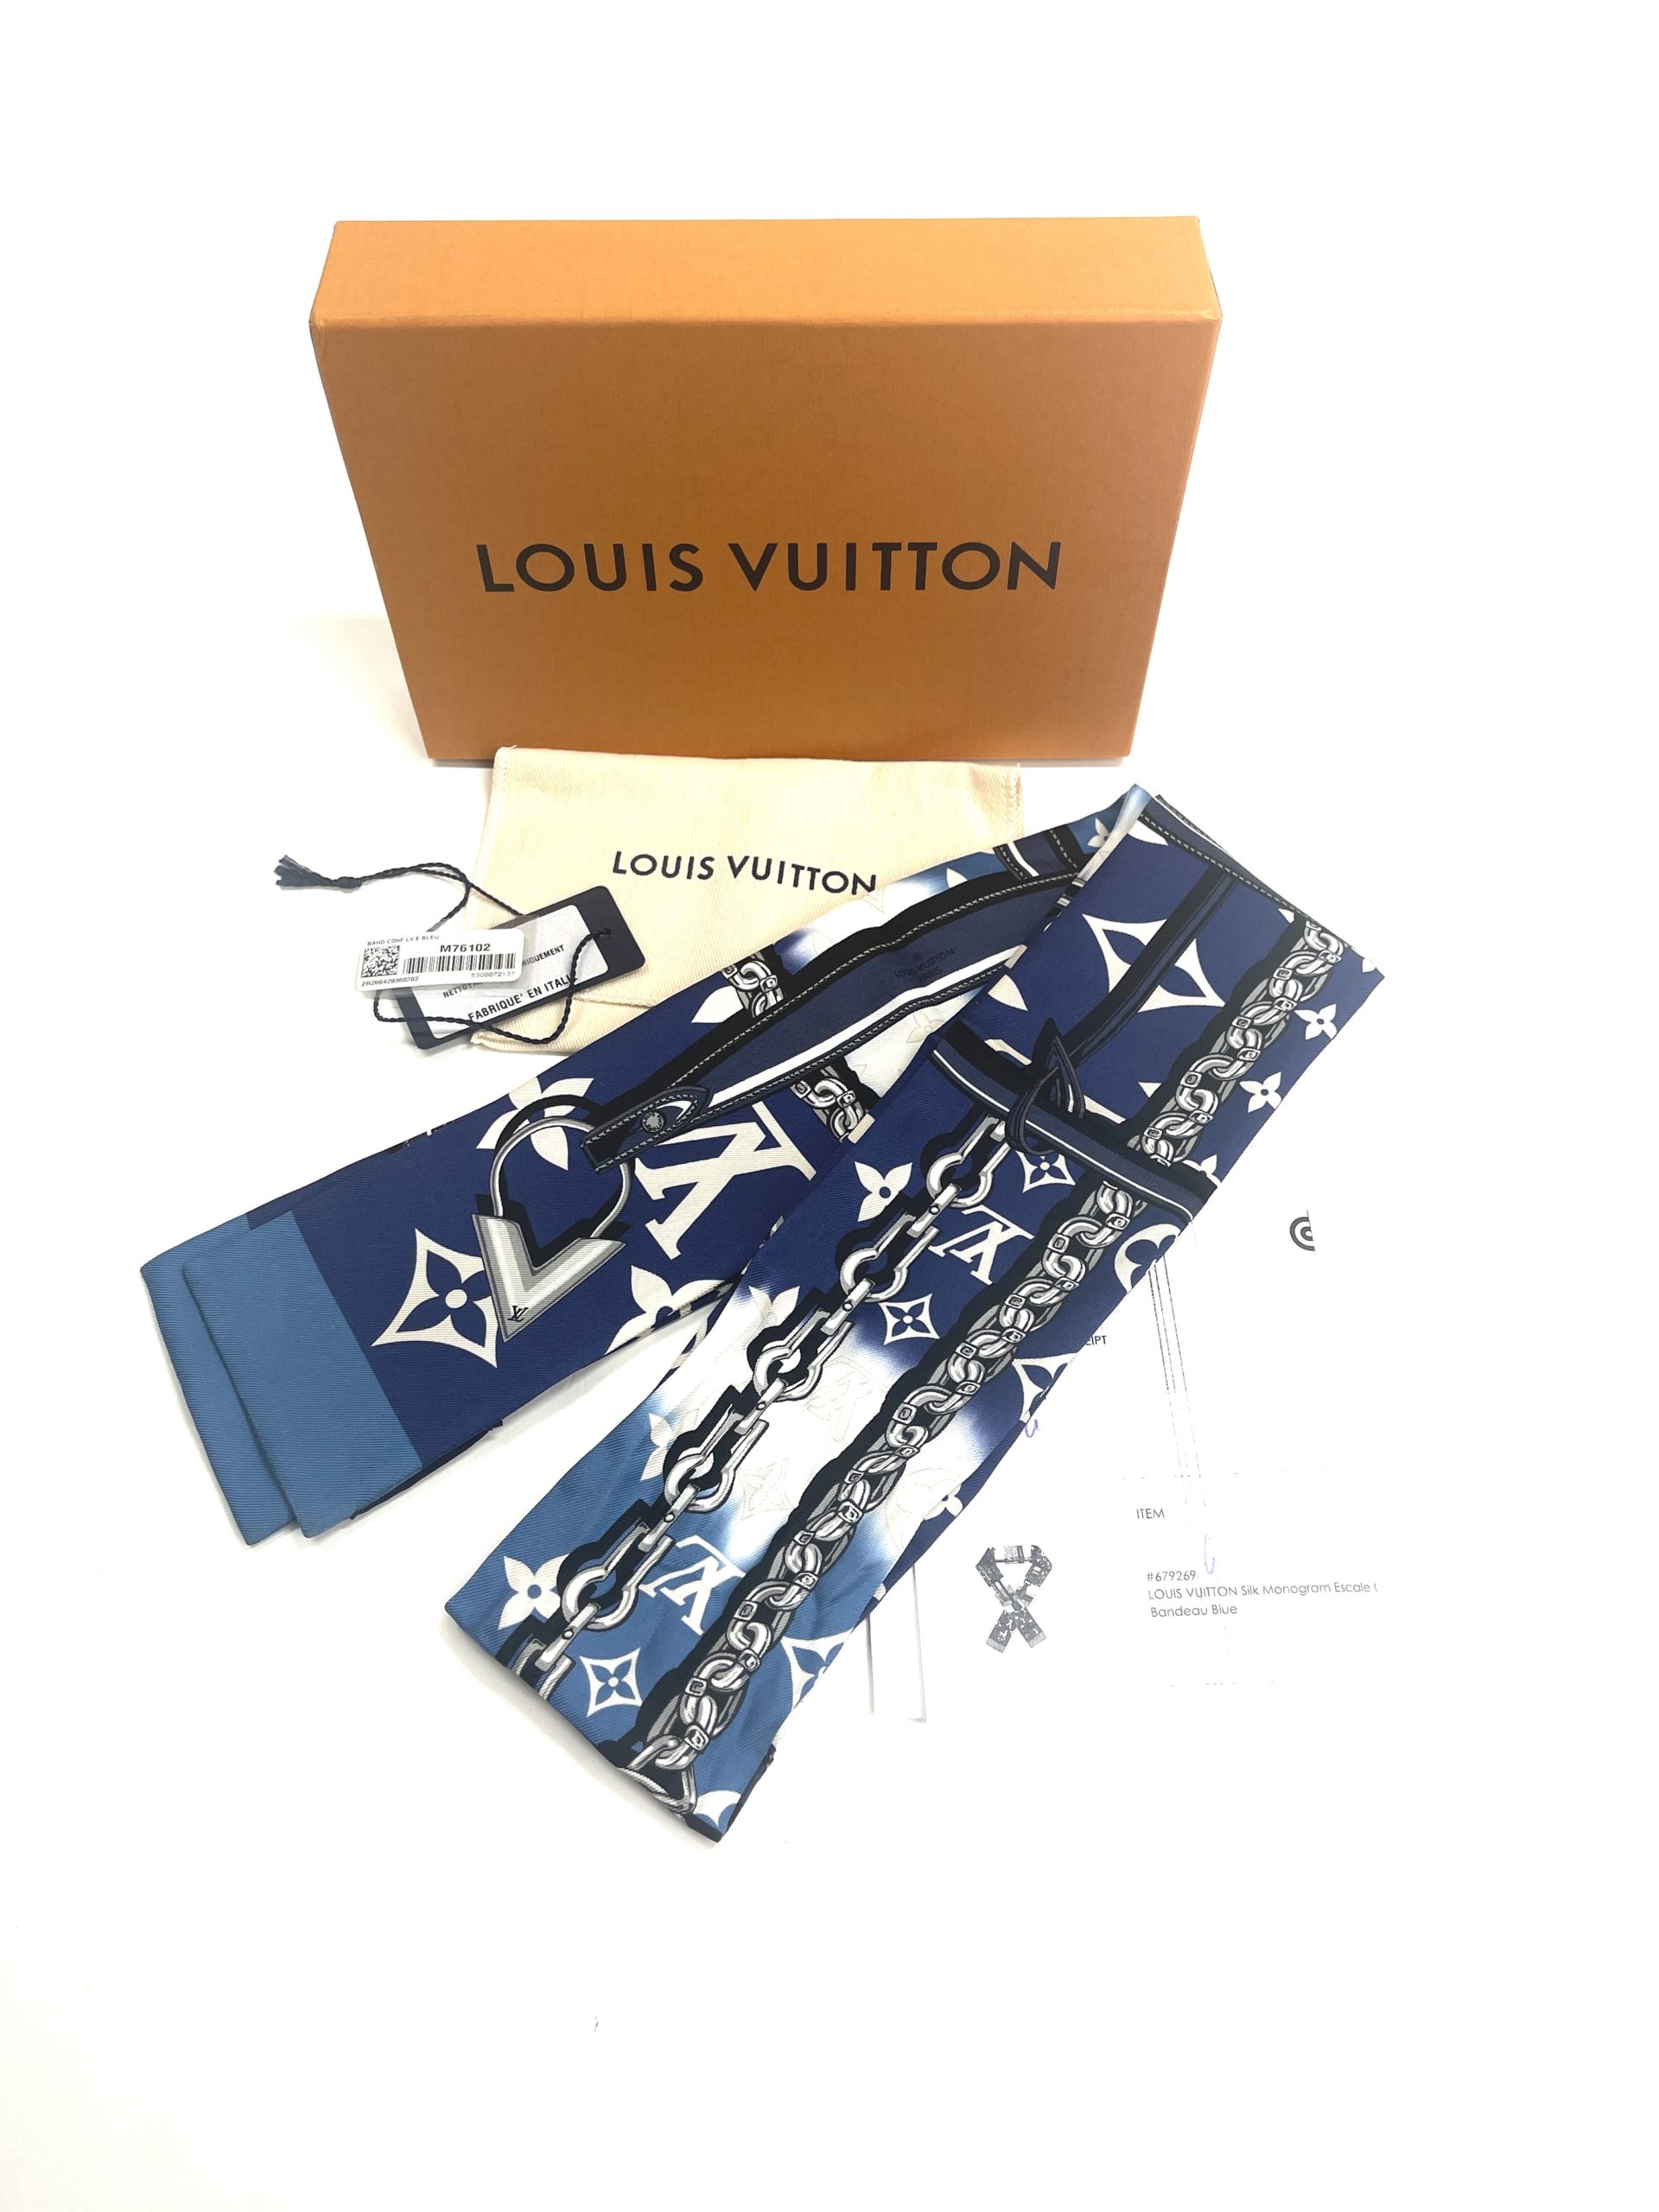 Louis Vuitton Red & Blue Twilly Scarf with Box